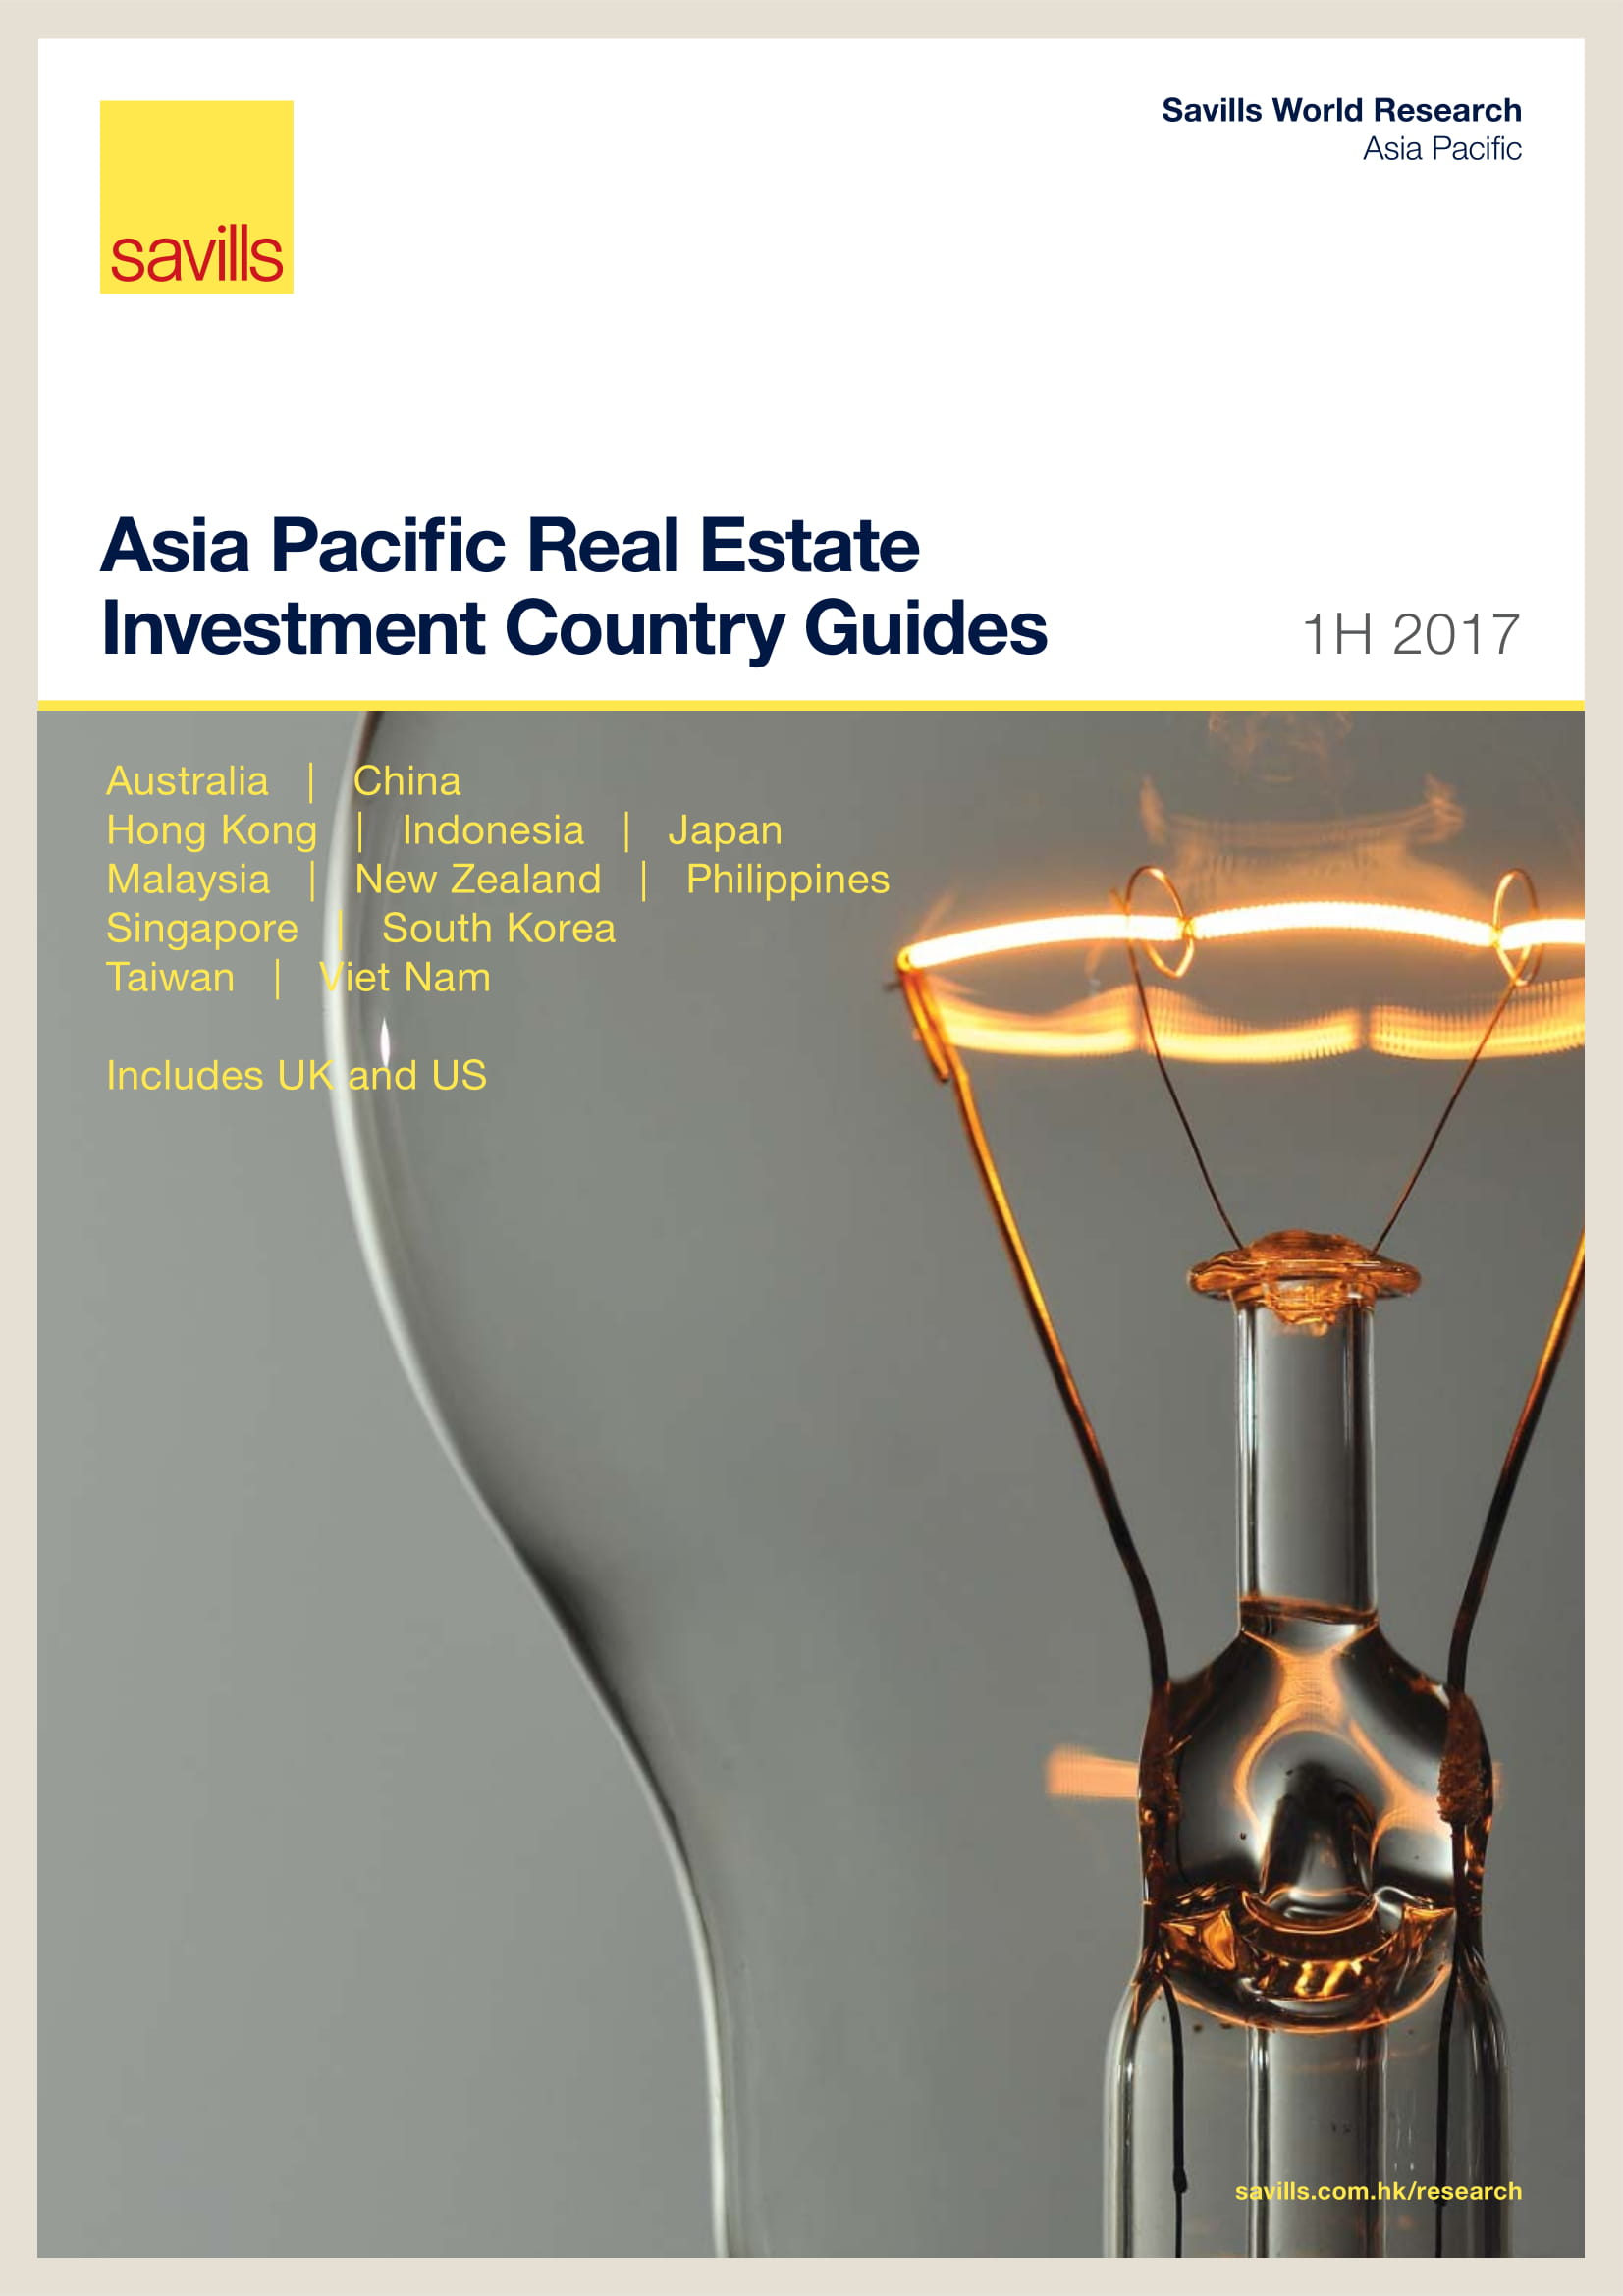 Asia Pacific Real Estate Investment Country Guides 1H 2017